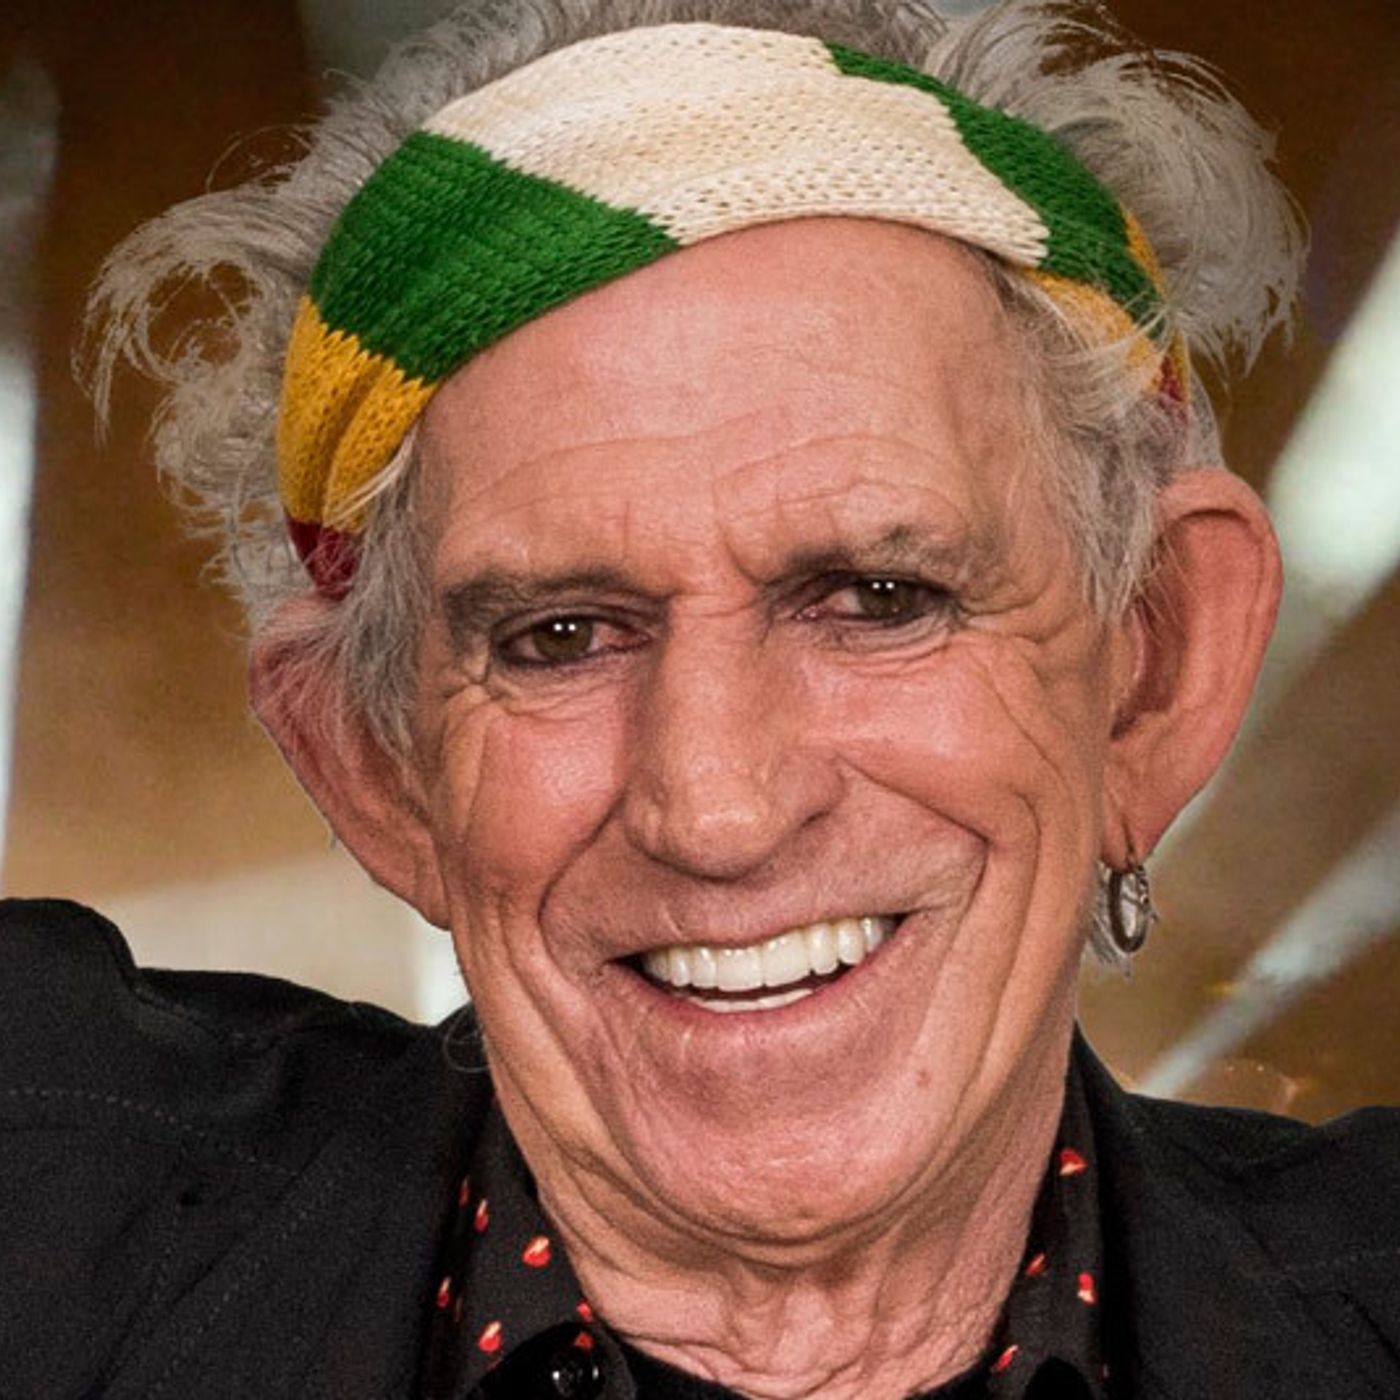 Keith Richards on No Filter tour, retirement and new Rolling Stones album!